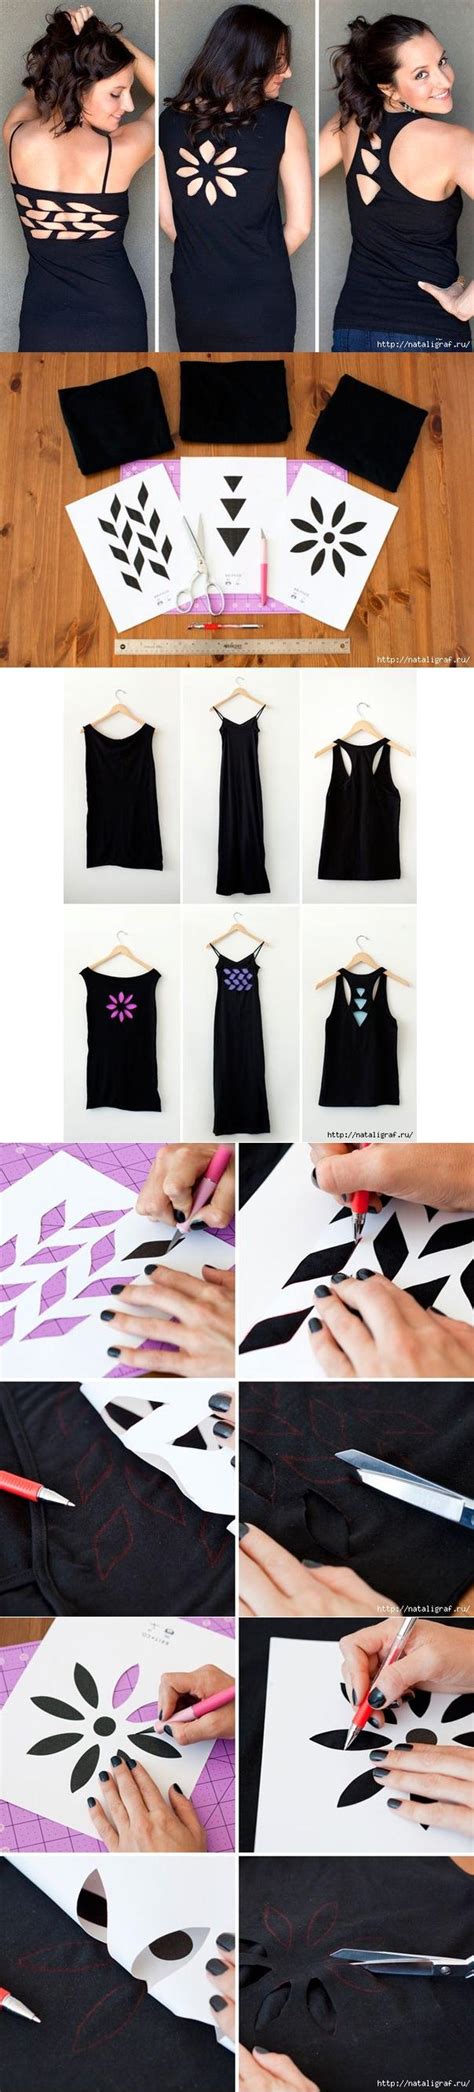 With cold shoulder tops being one of the hottest trends of the season. DIY Shirt Cutting DIY Projects | UsefulDIY.com